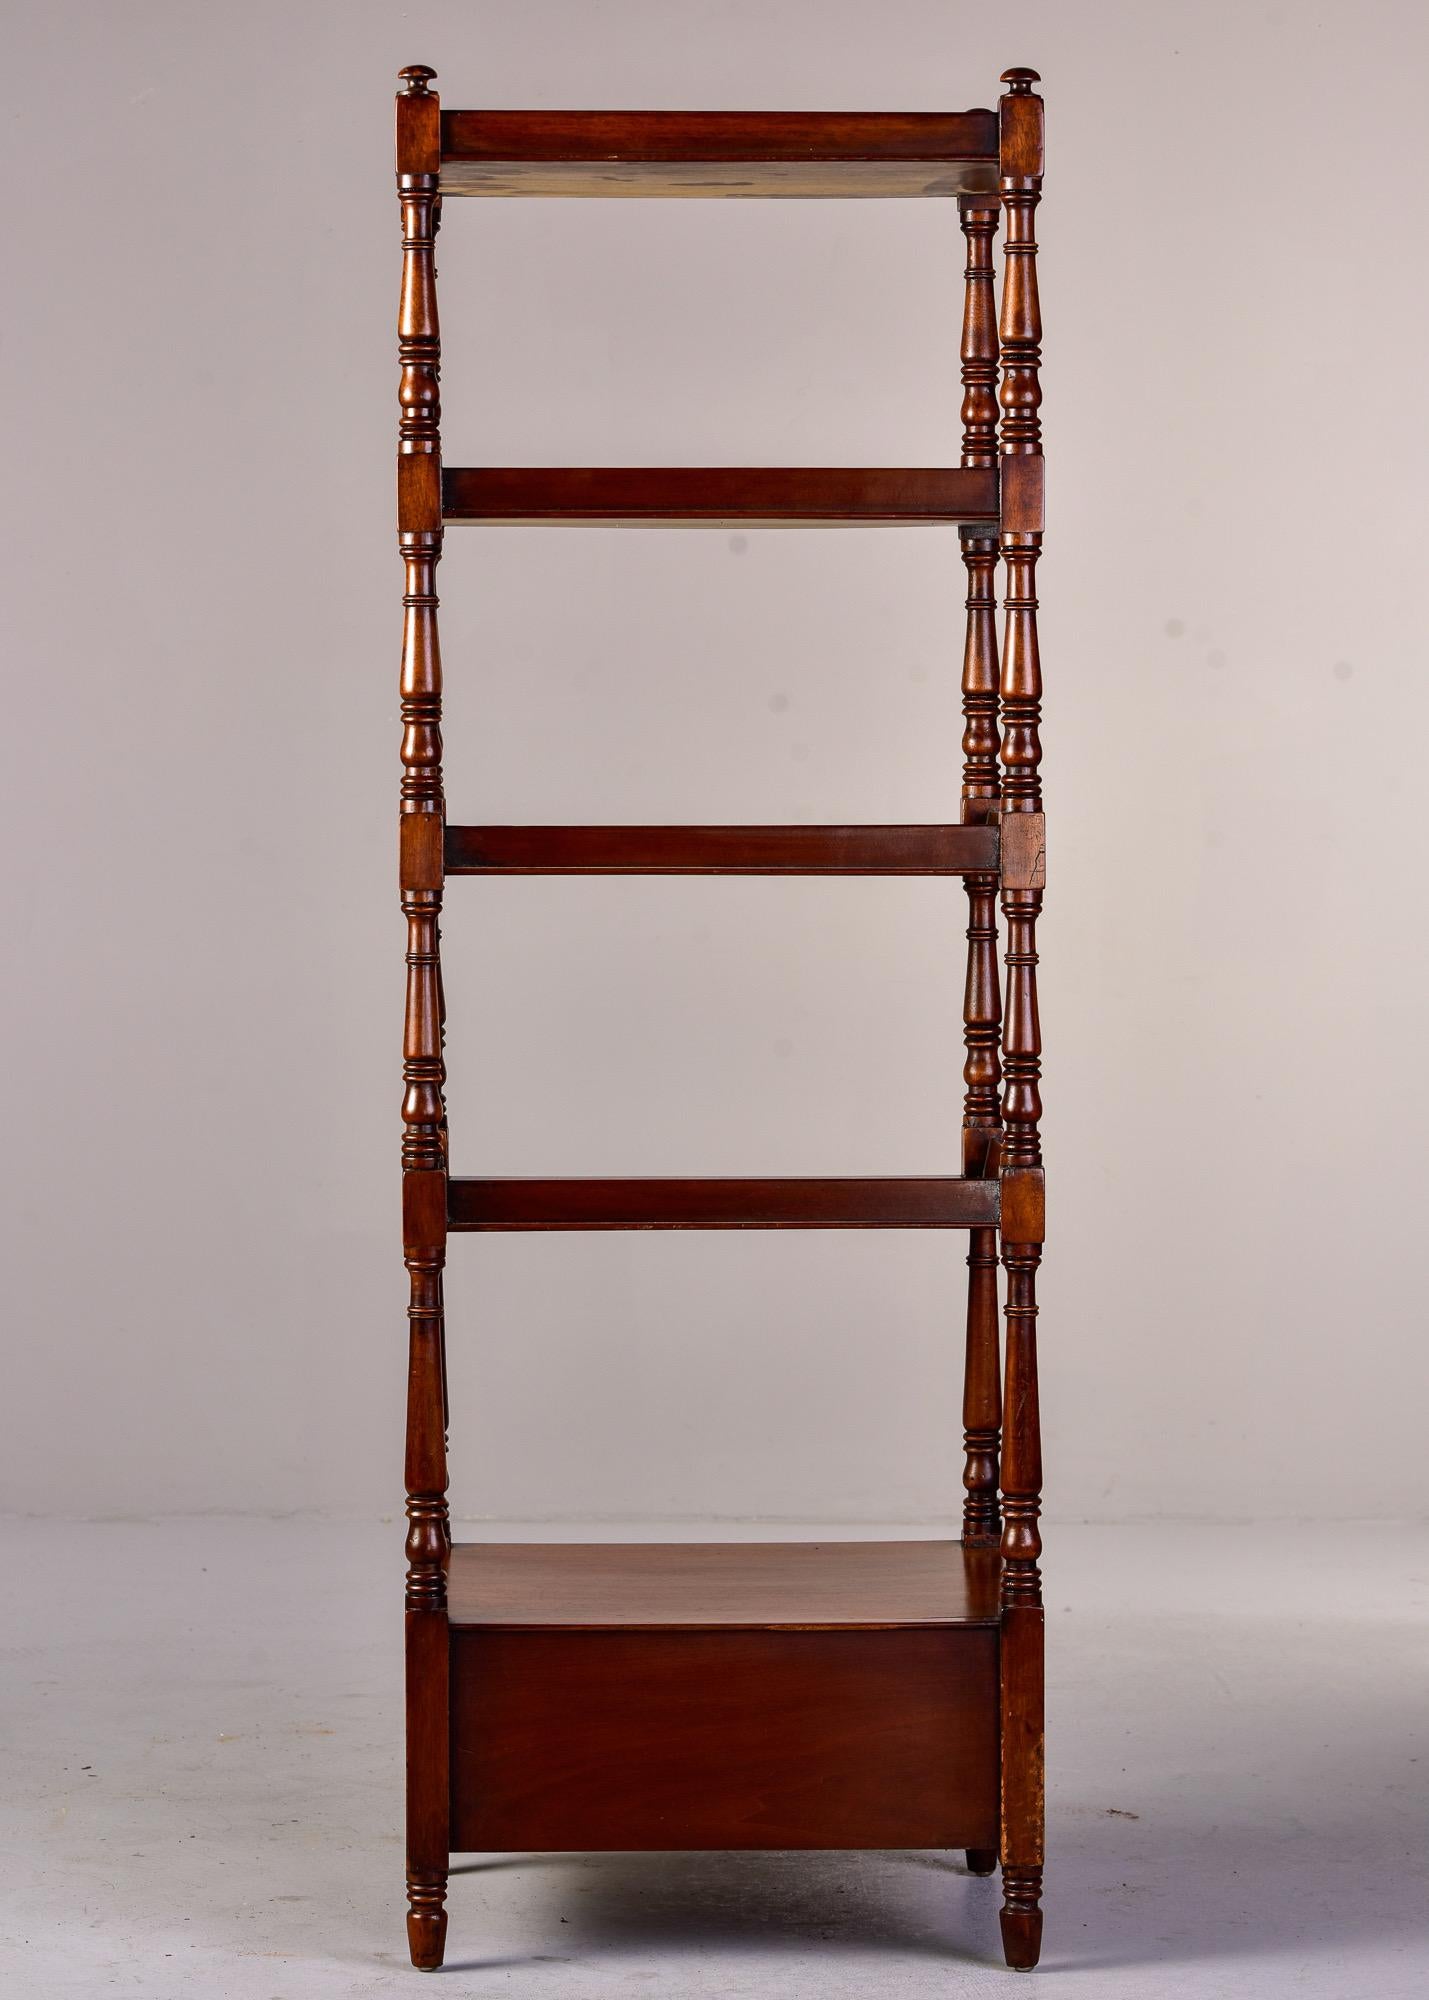 20th Century Early 20th C English Mahogany Four Tier Etagere or What Not Shelf